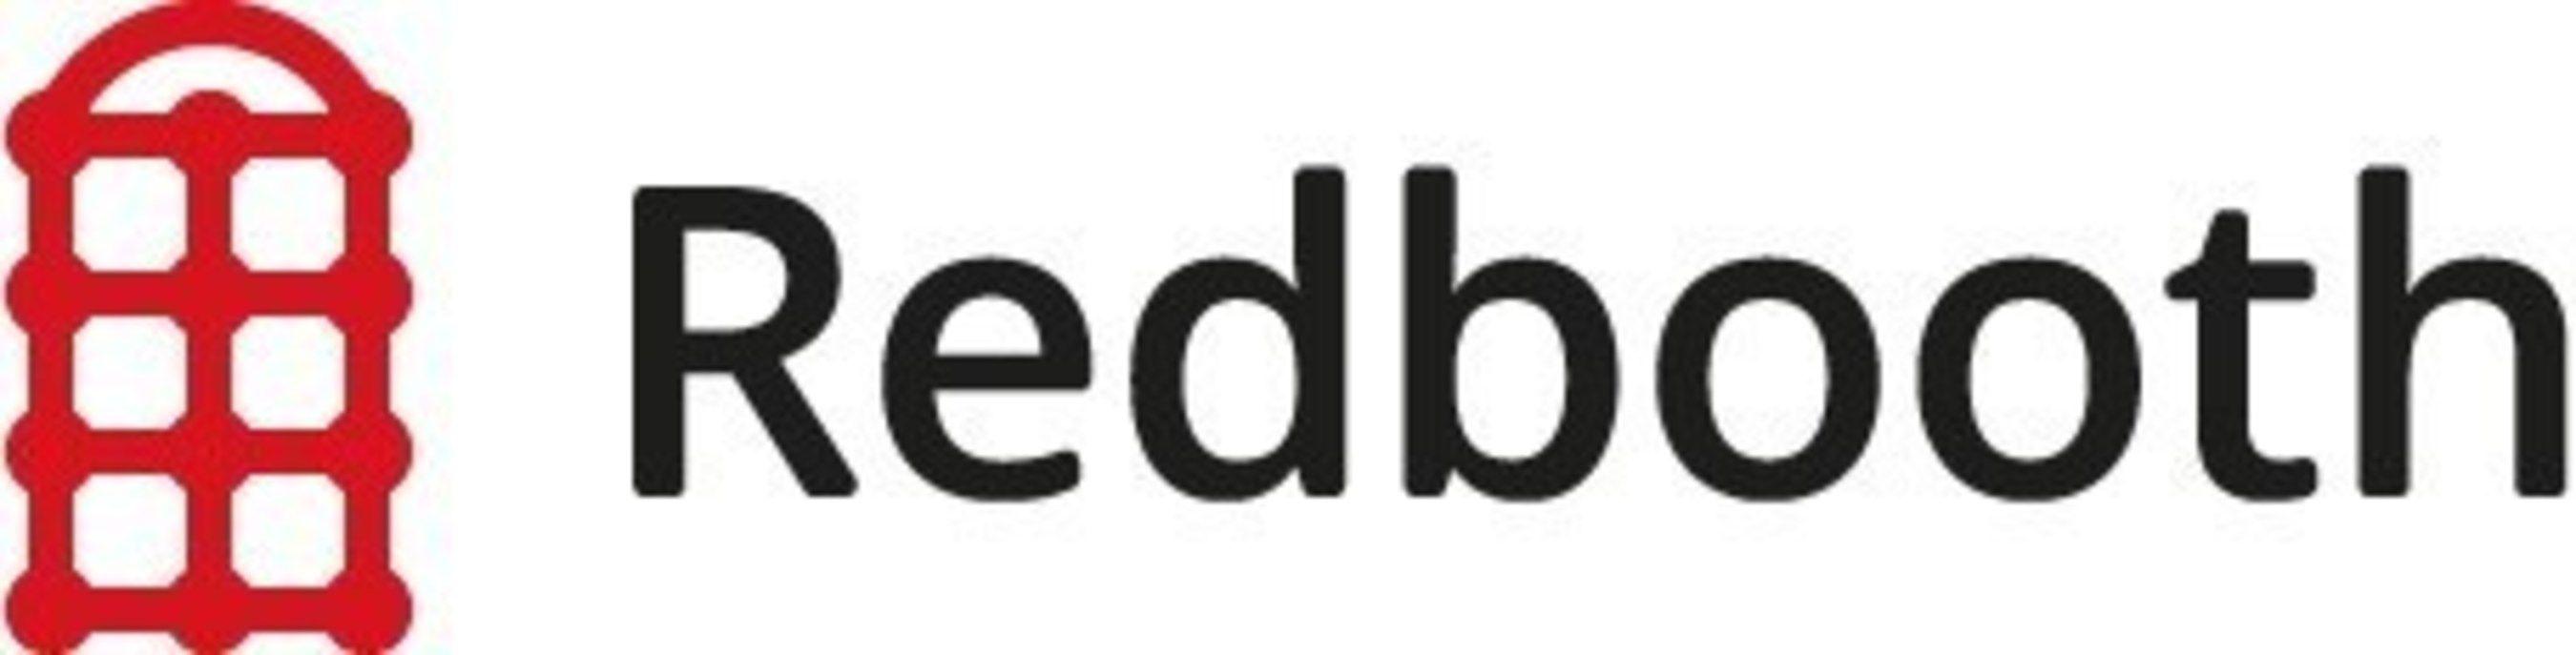 Red Booth Logo - Redbooth Raises $11M Series B and Signs OEM Deal for CA Technologies